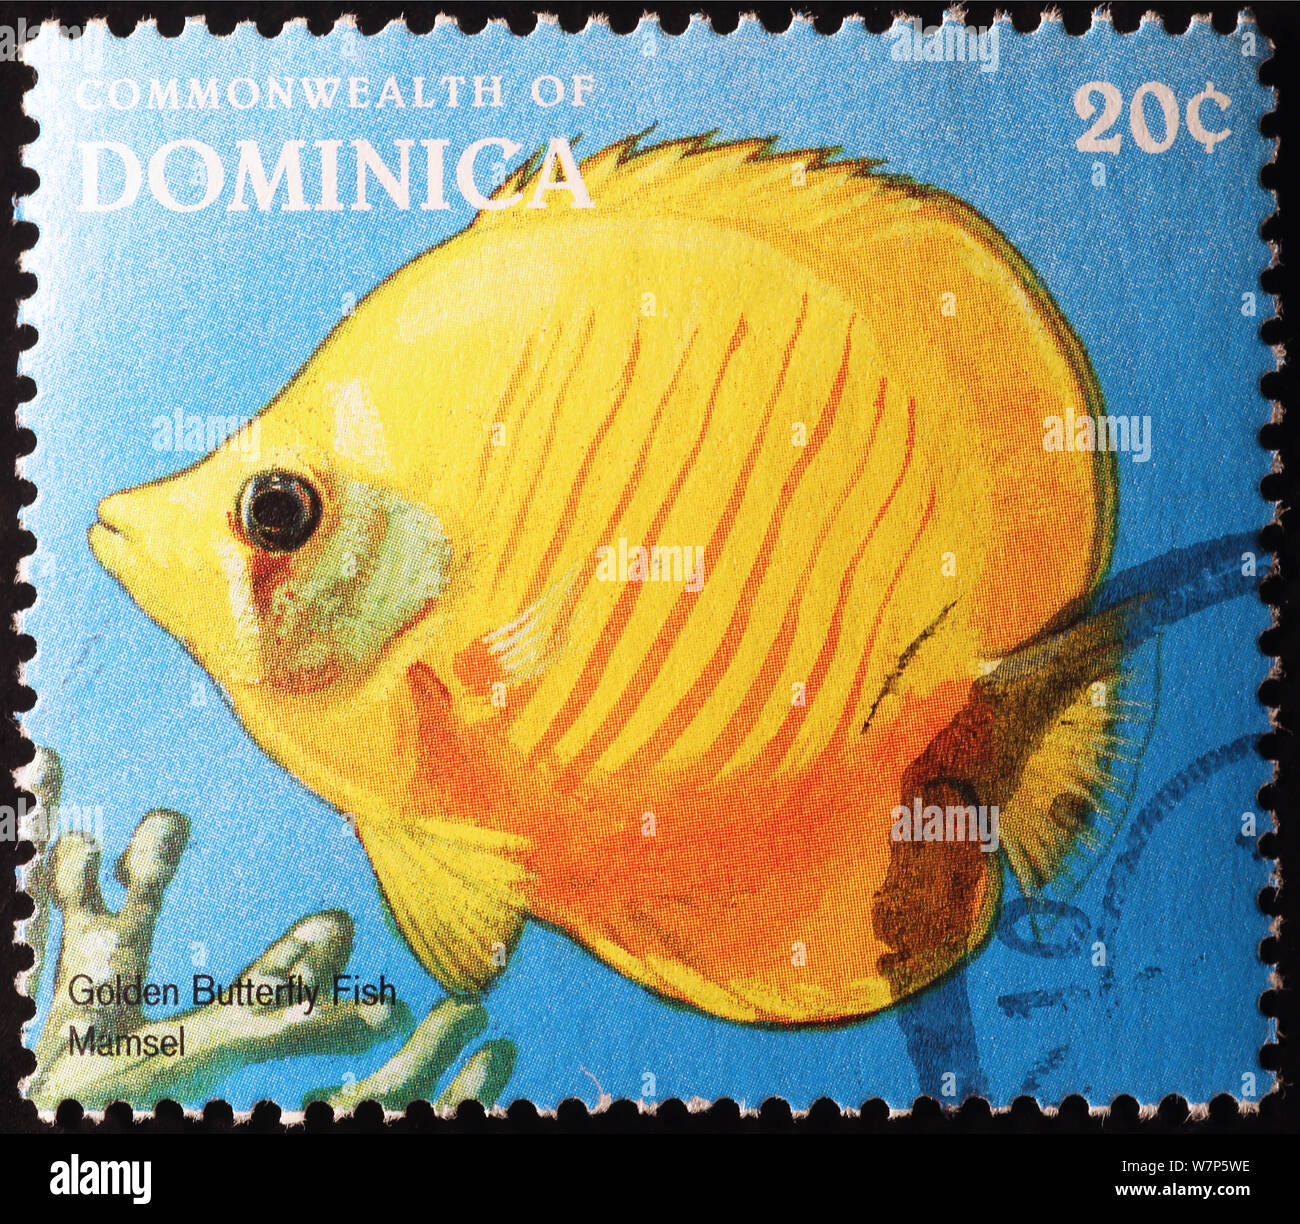 Tropical yellow fish on postage stamp of Dominica Stock Photo